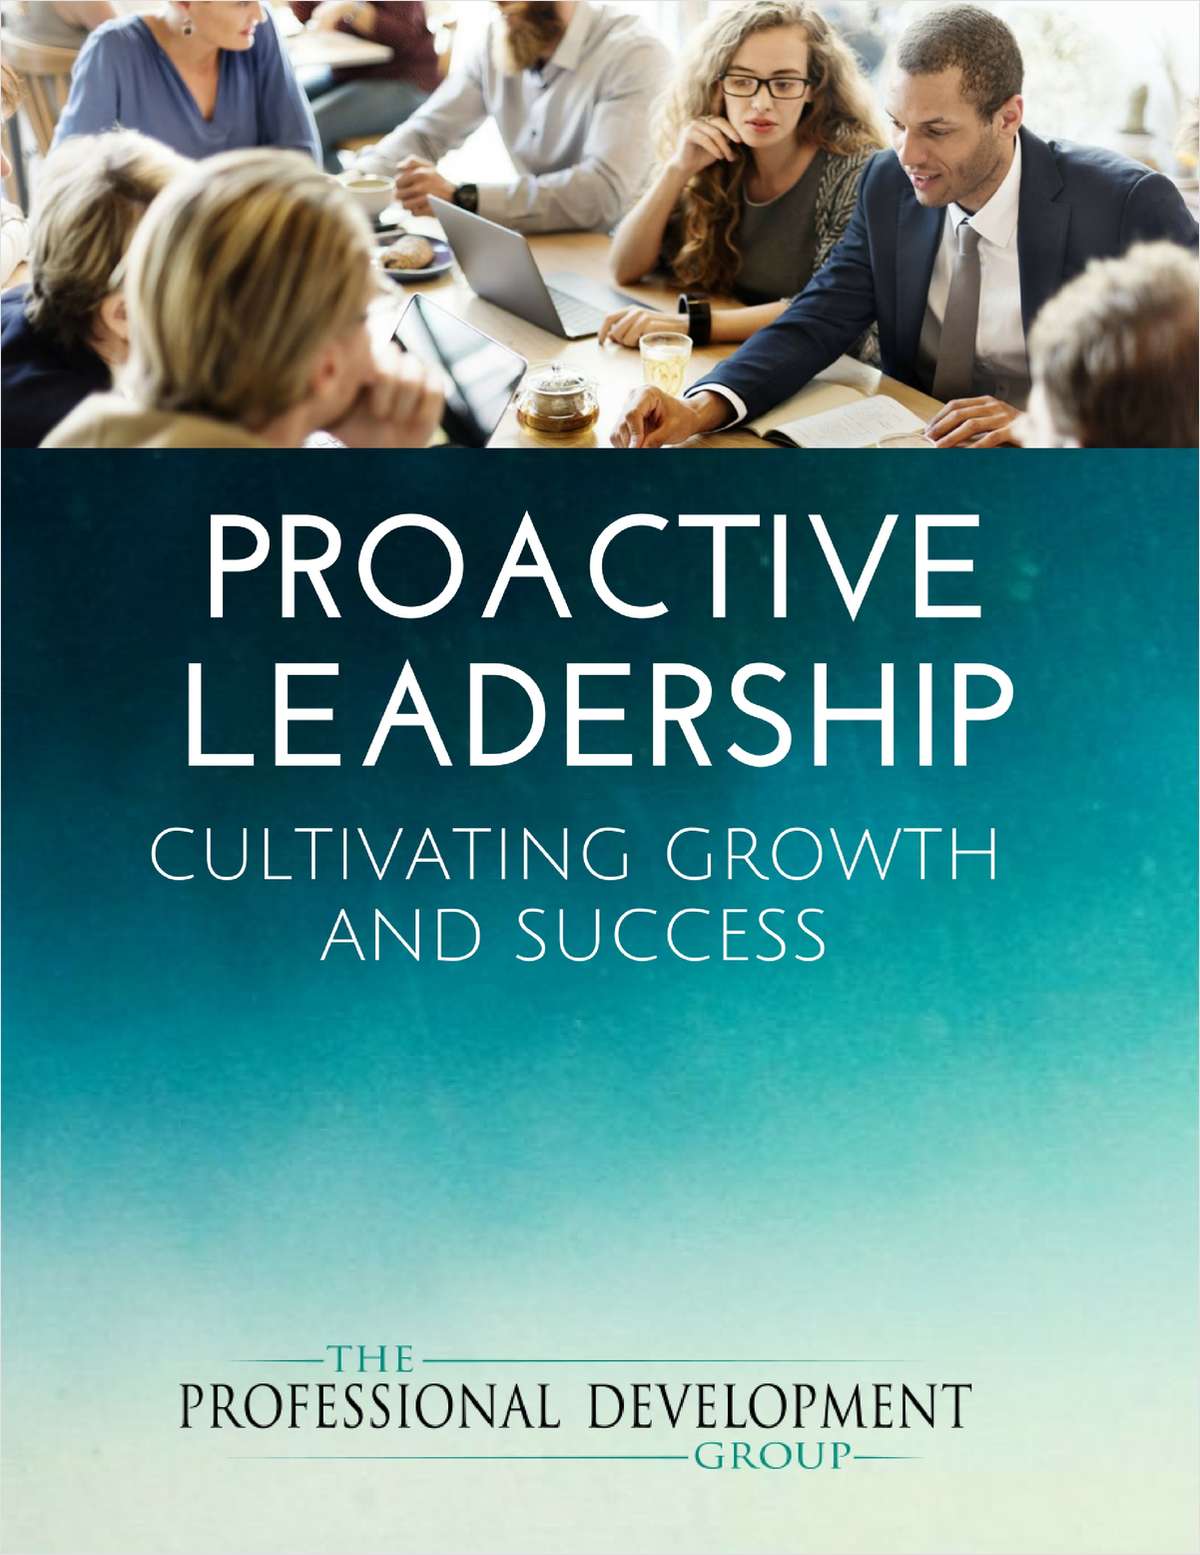 Proactive Leadership - Cultivating Growth and Success